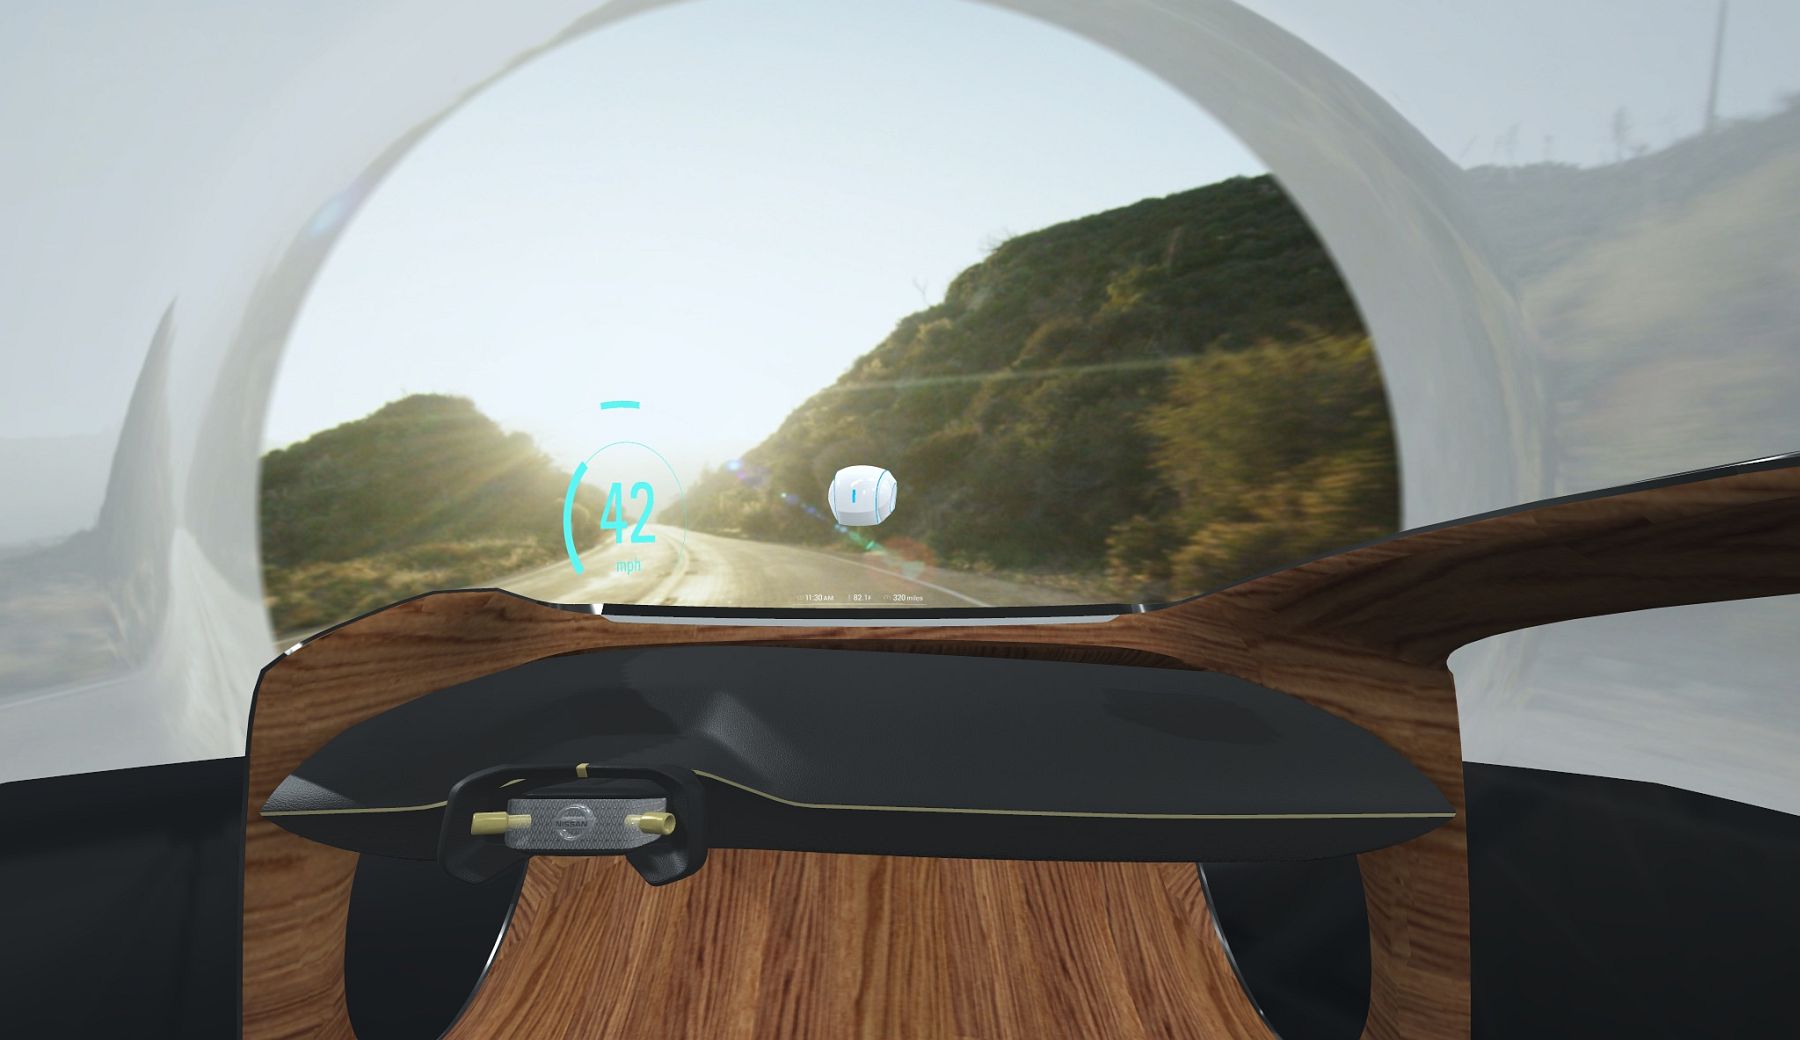 Nissan Invisible-to-Visible technology concept